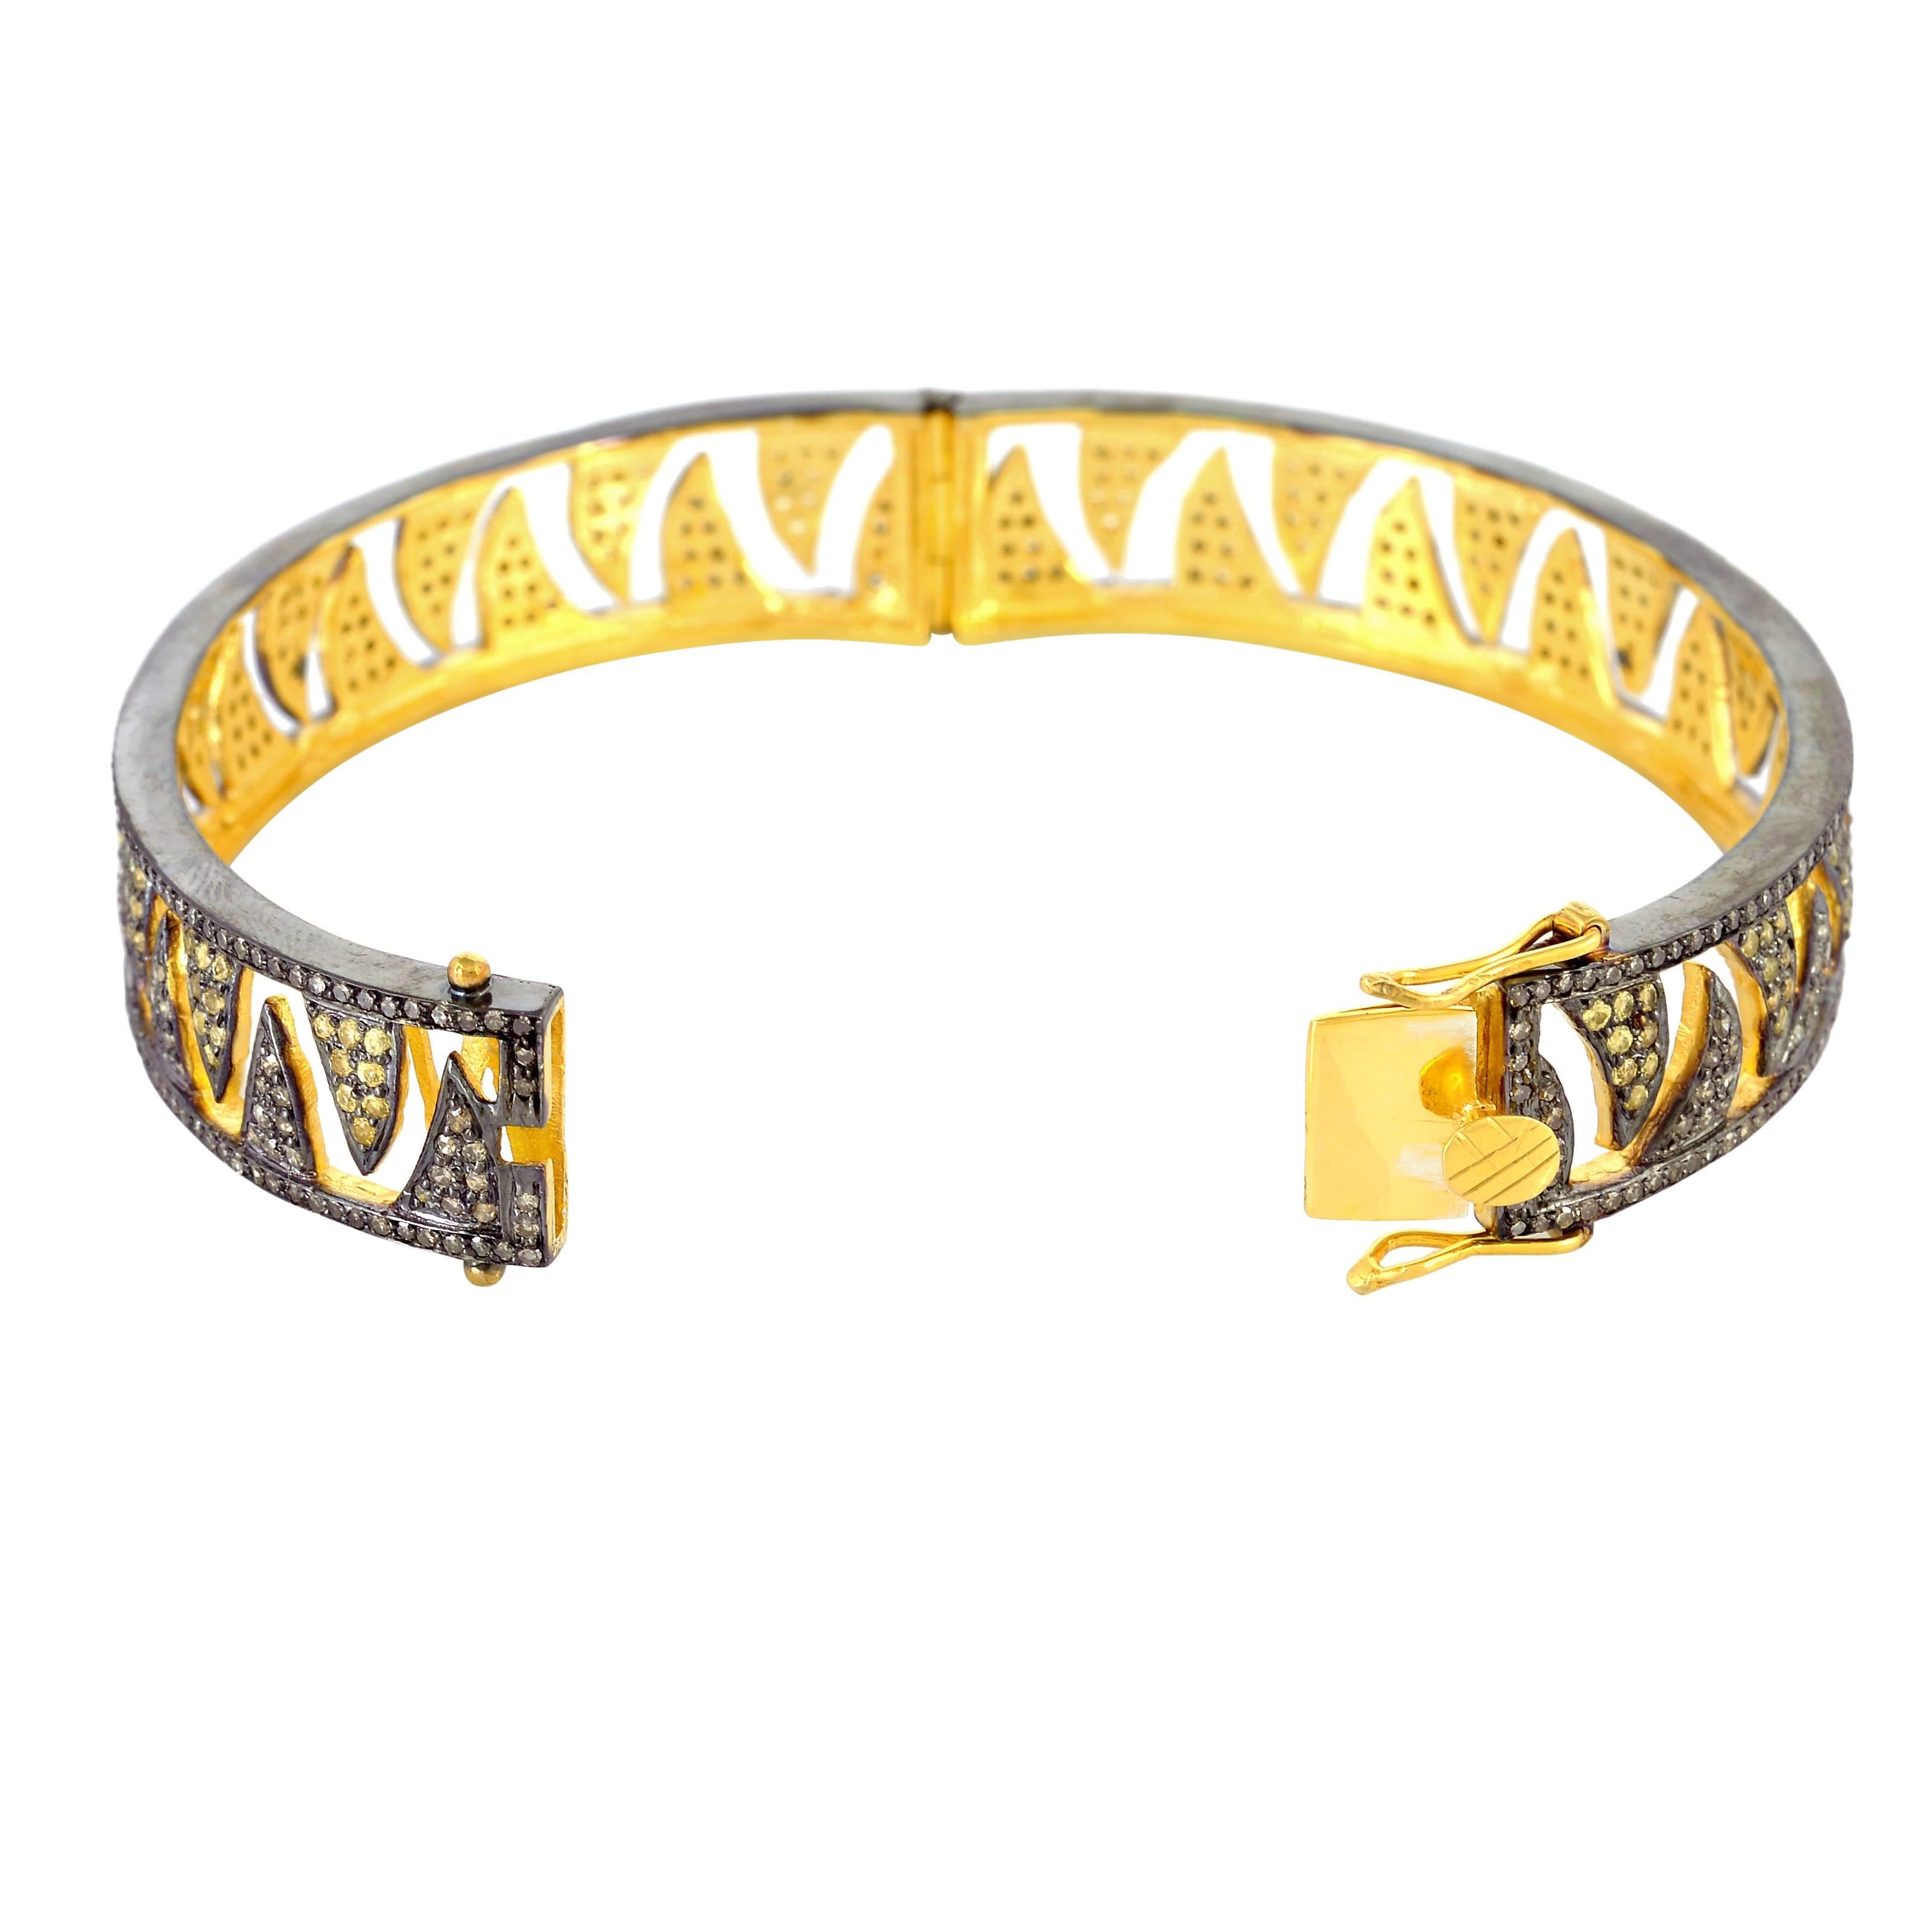 This Meghna Jewels Claw bracelet with interlocking claw pave arches looks ultra modern & stunning with sparkling yellow sapphire and champagne diamonds. Cast in 18K Gold and sterling silver. It is hand set in 2.27 carat champagne diamonds and 1.70